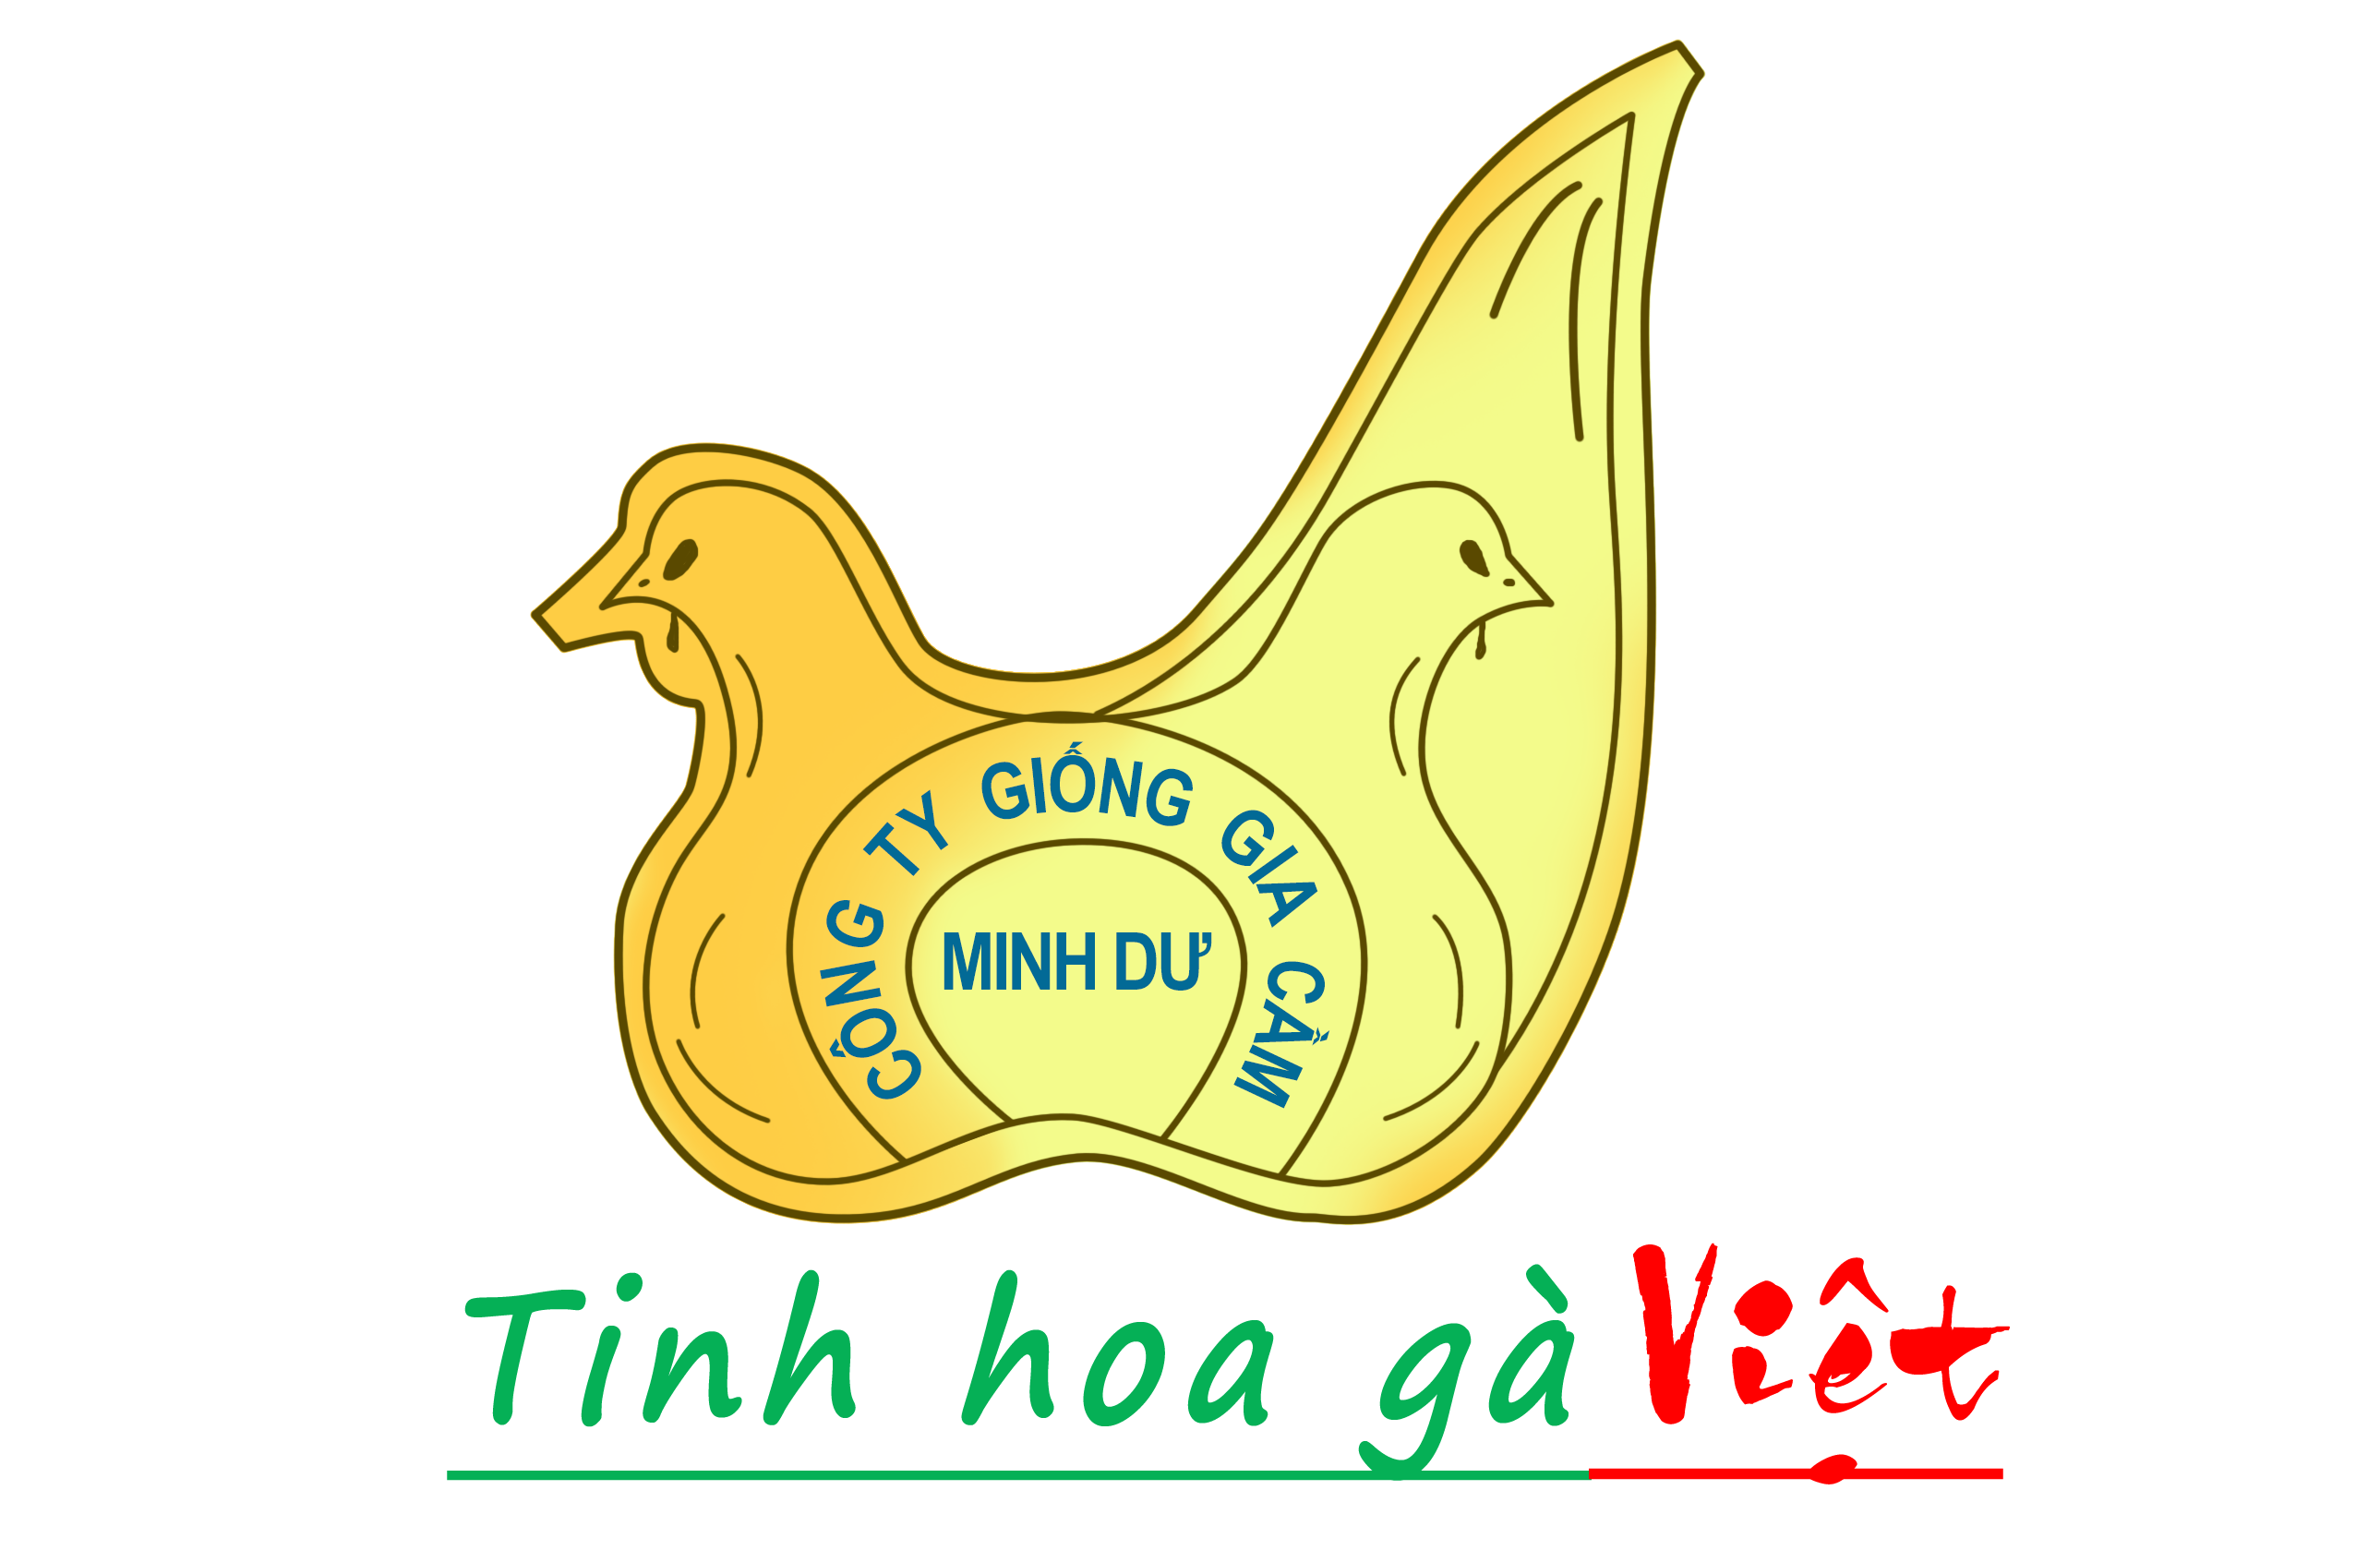 Chickens selected Minh Du Binh Dinh